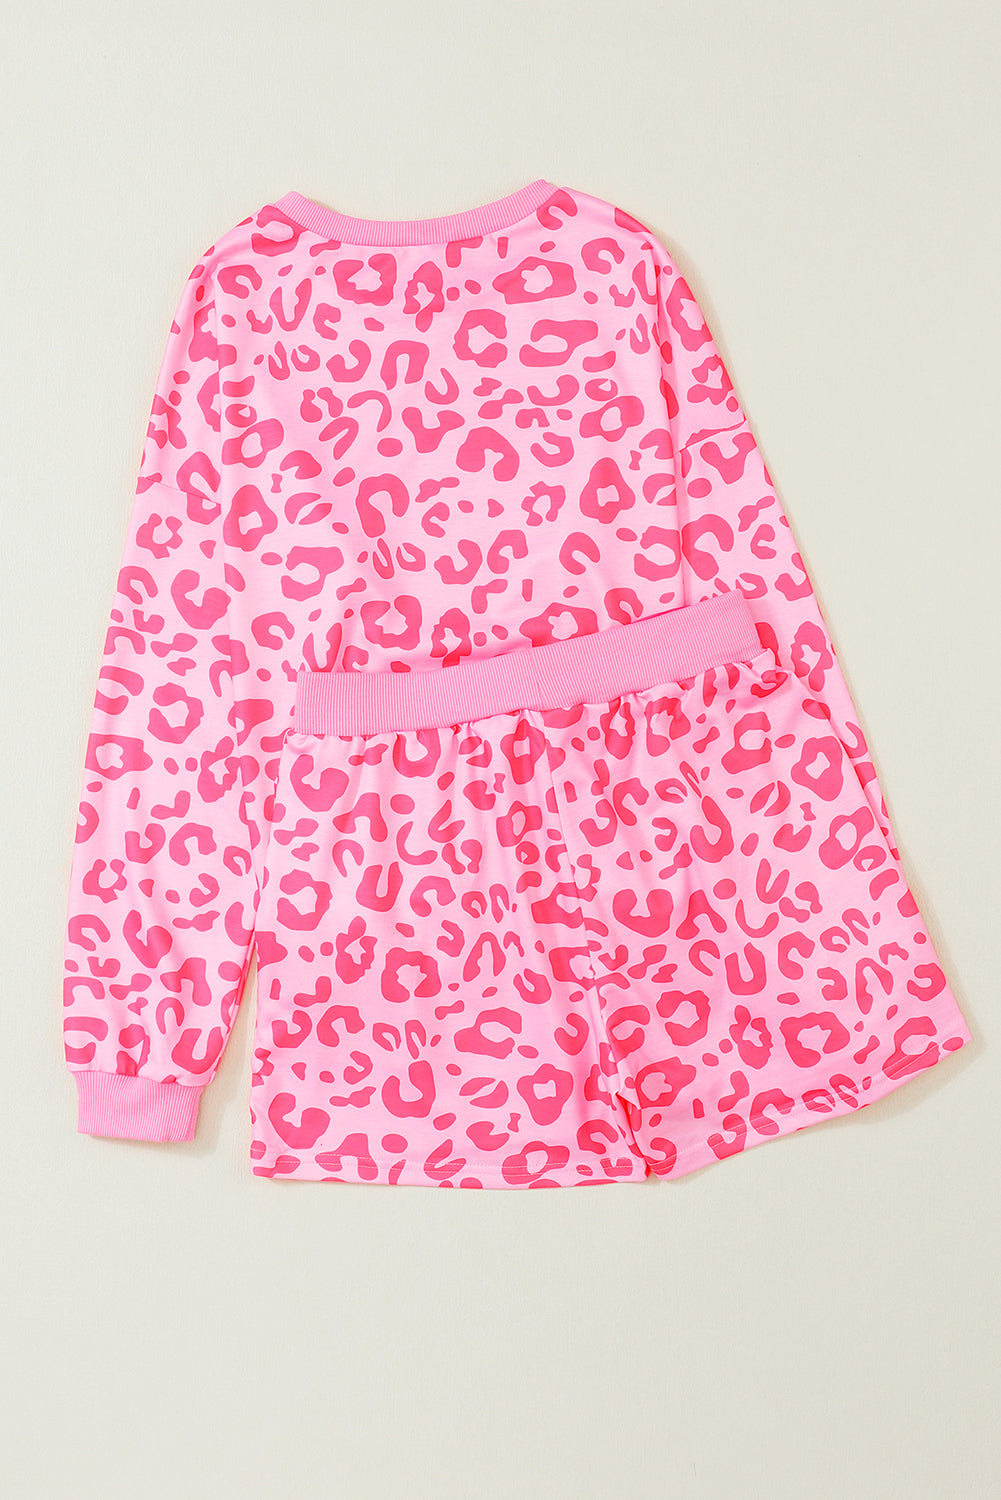 Leopard Long Sleeve Satin Tie Shorts - Two Piece Set in Pink